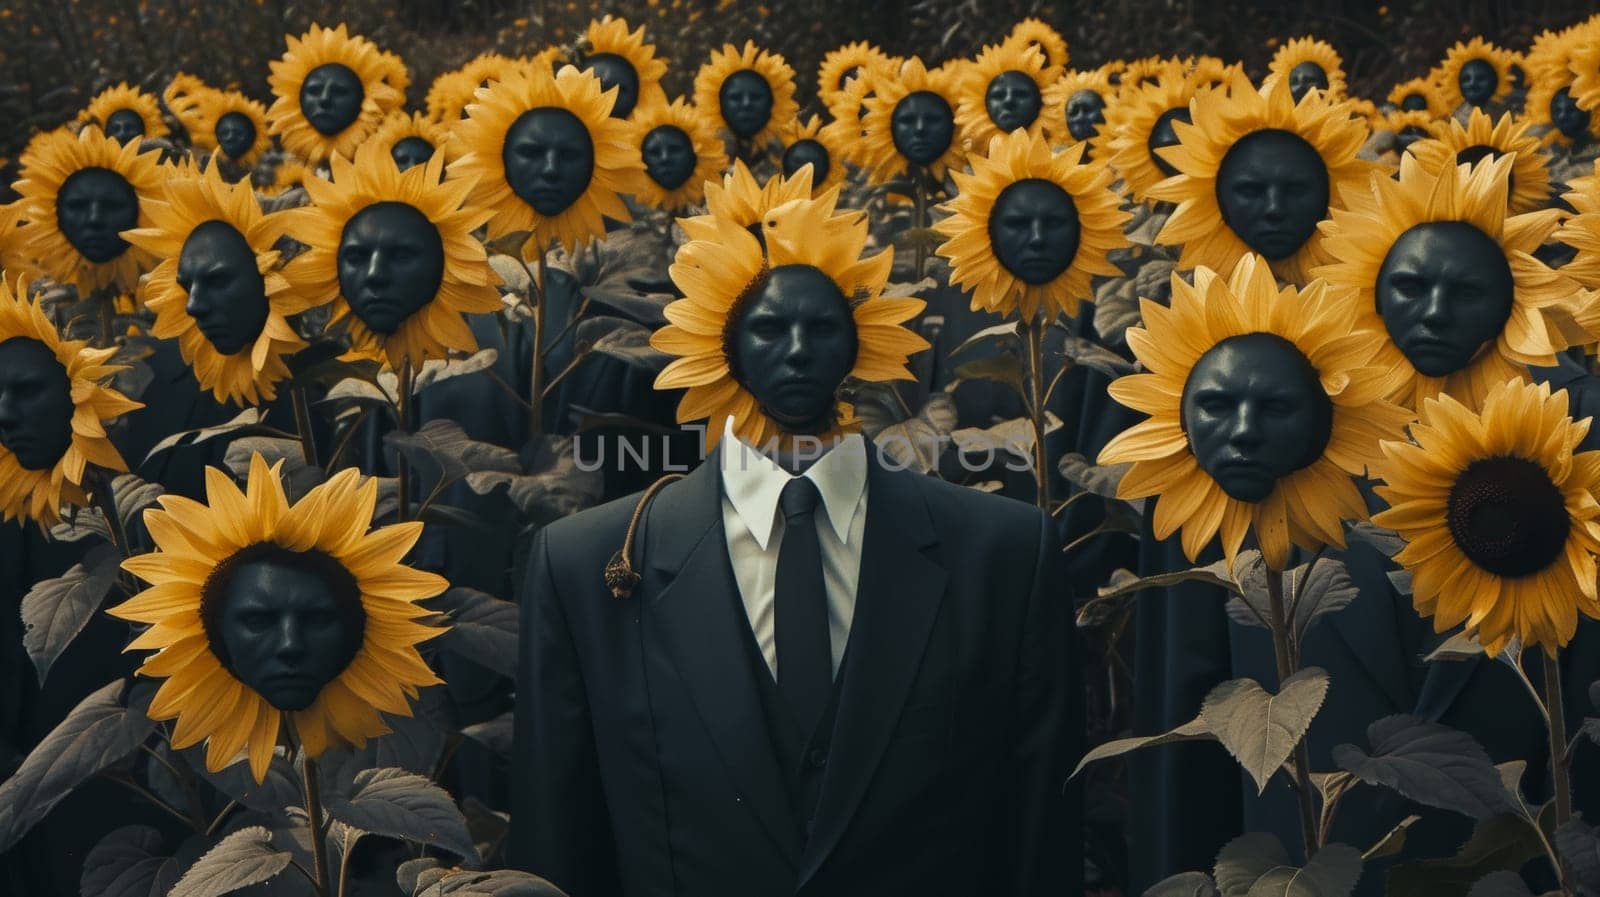 A man in a suit and tie surrounded by sunflowers